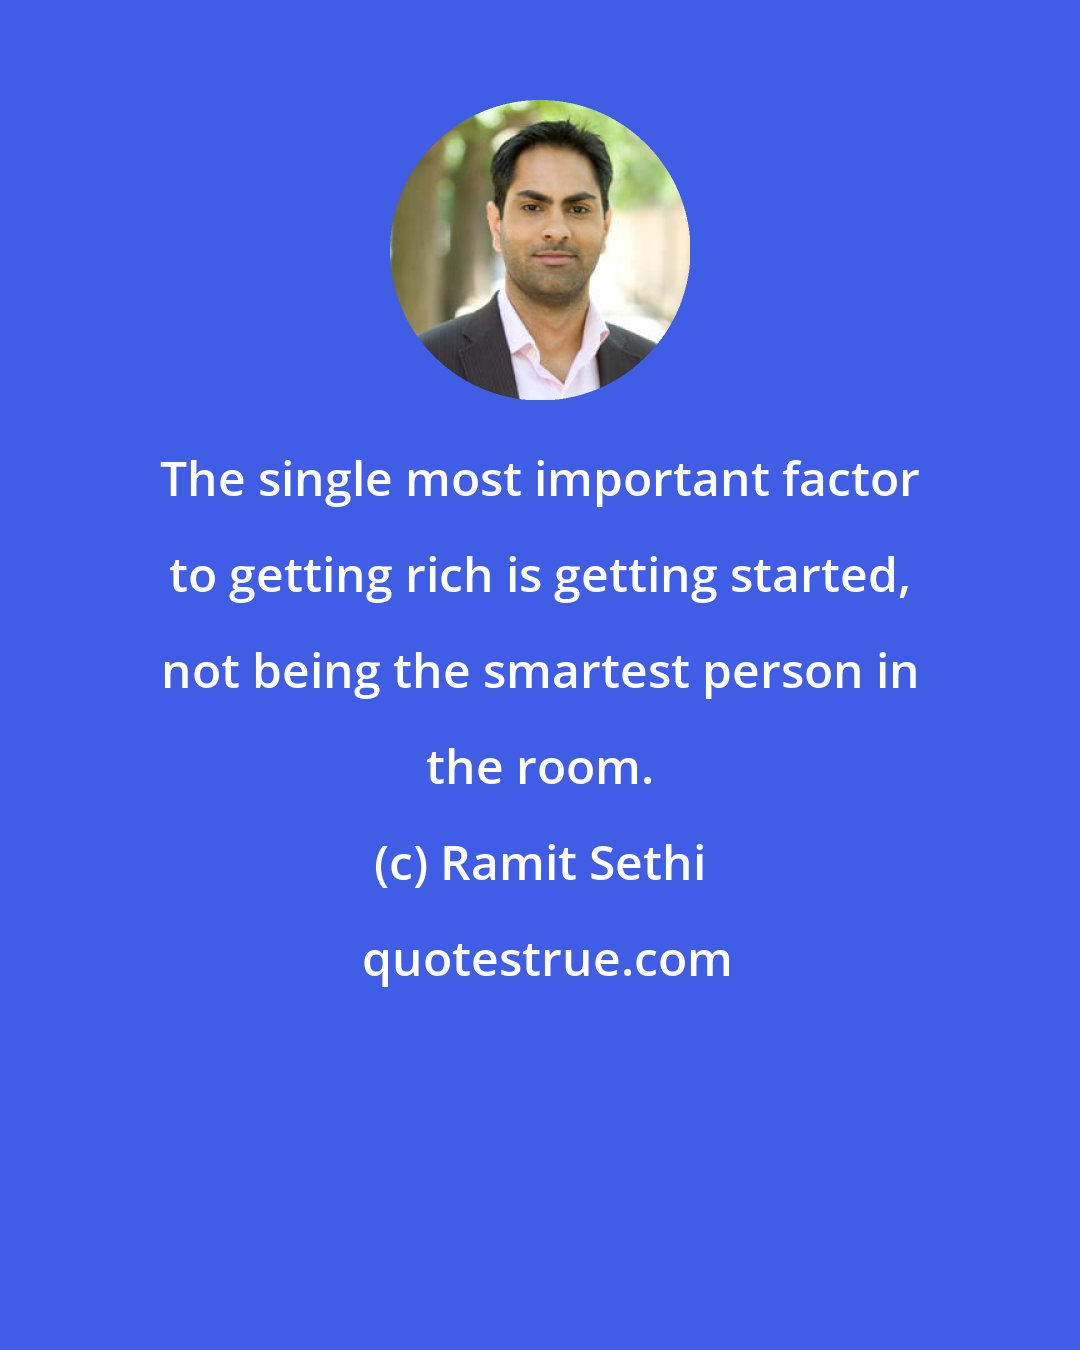 Ramit Sethi: The single most important factor to getting rich is getting started, not being the smartest person in the room.